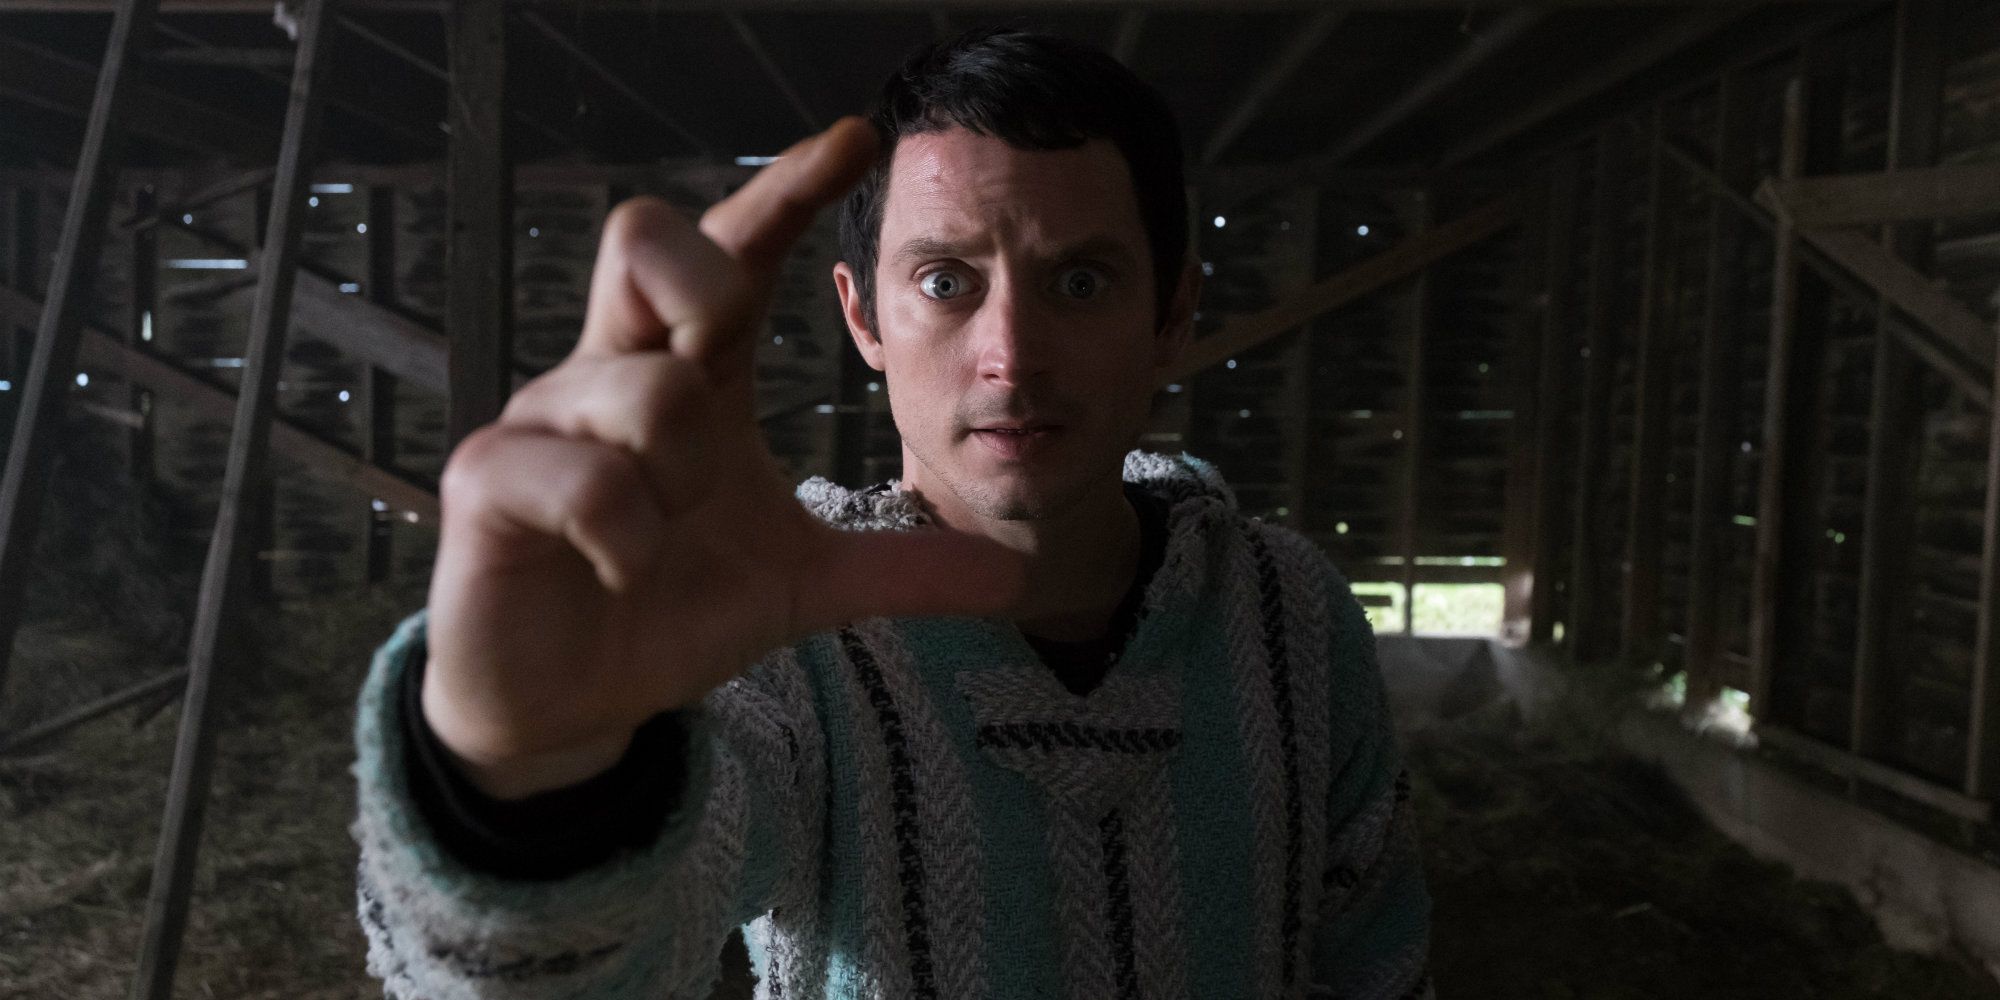 Netflix's New Supernatural Show Is A Reminder To Watch A Canceled 85% Rotten Tomatoes Series Starring Elijah Wood